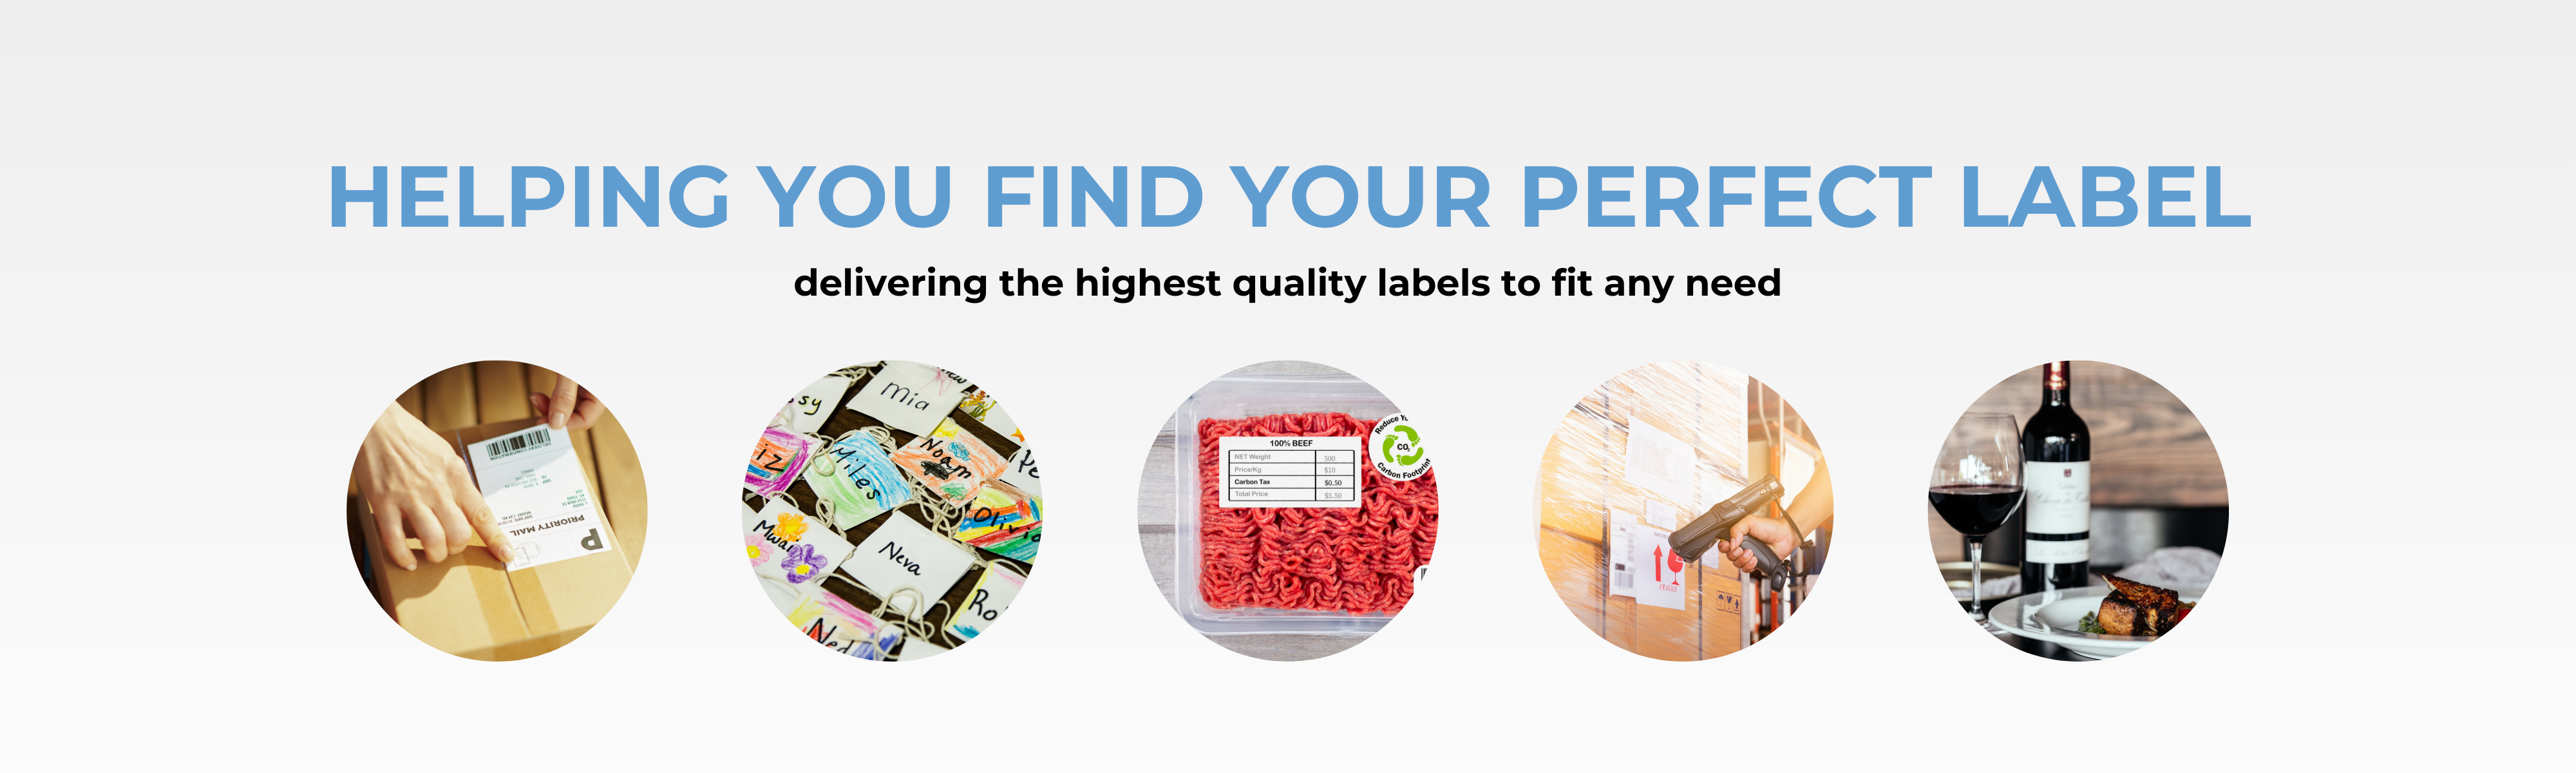 Helping you find your perfect labels